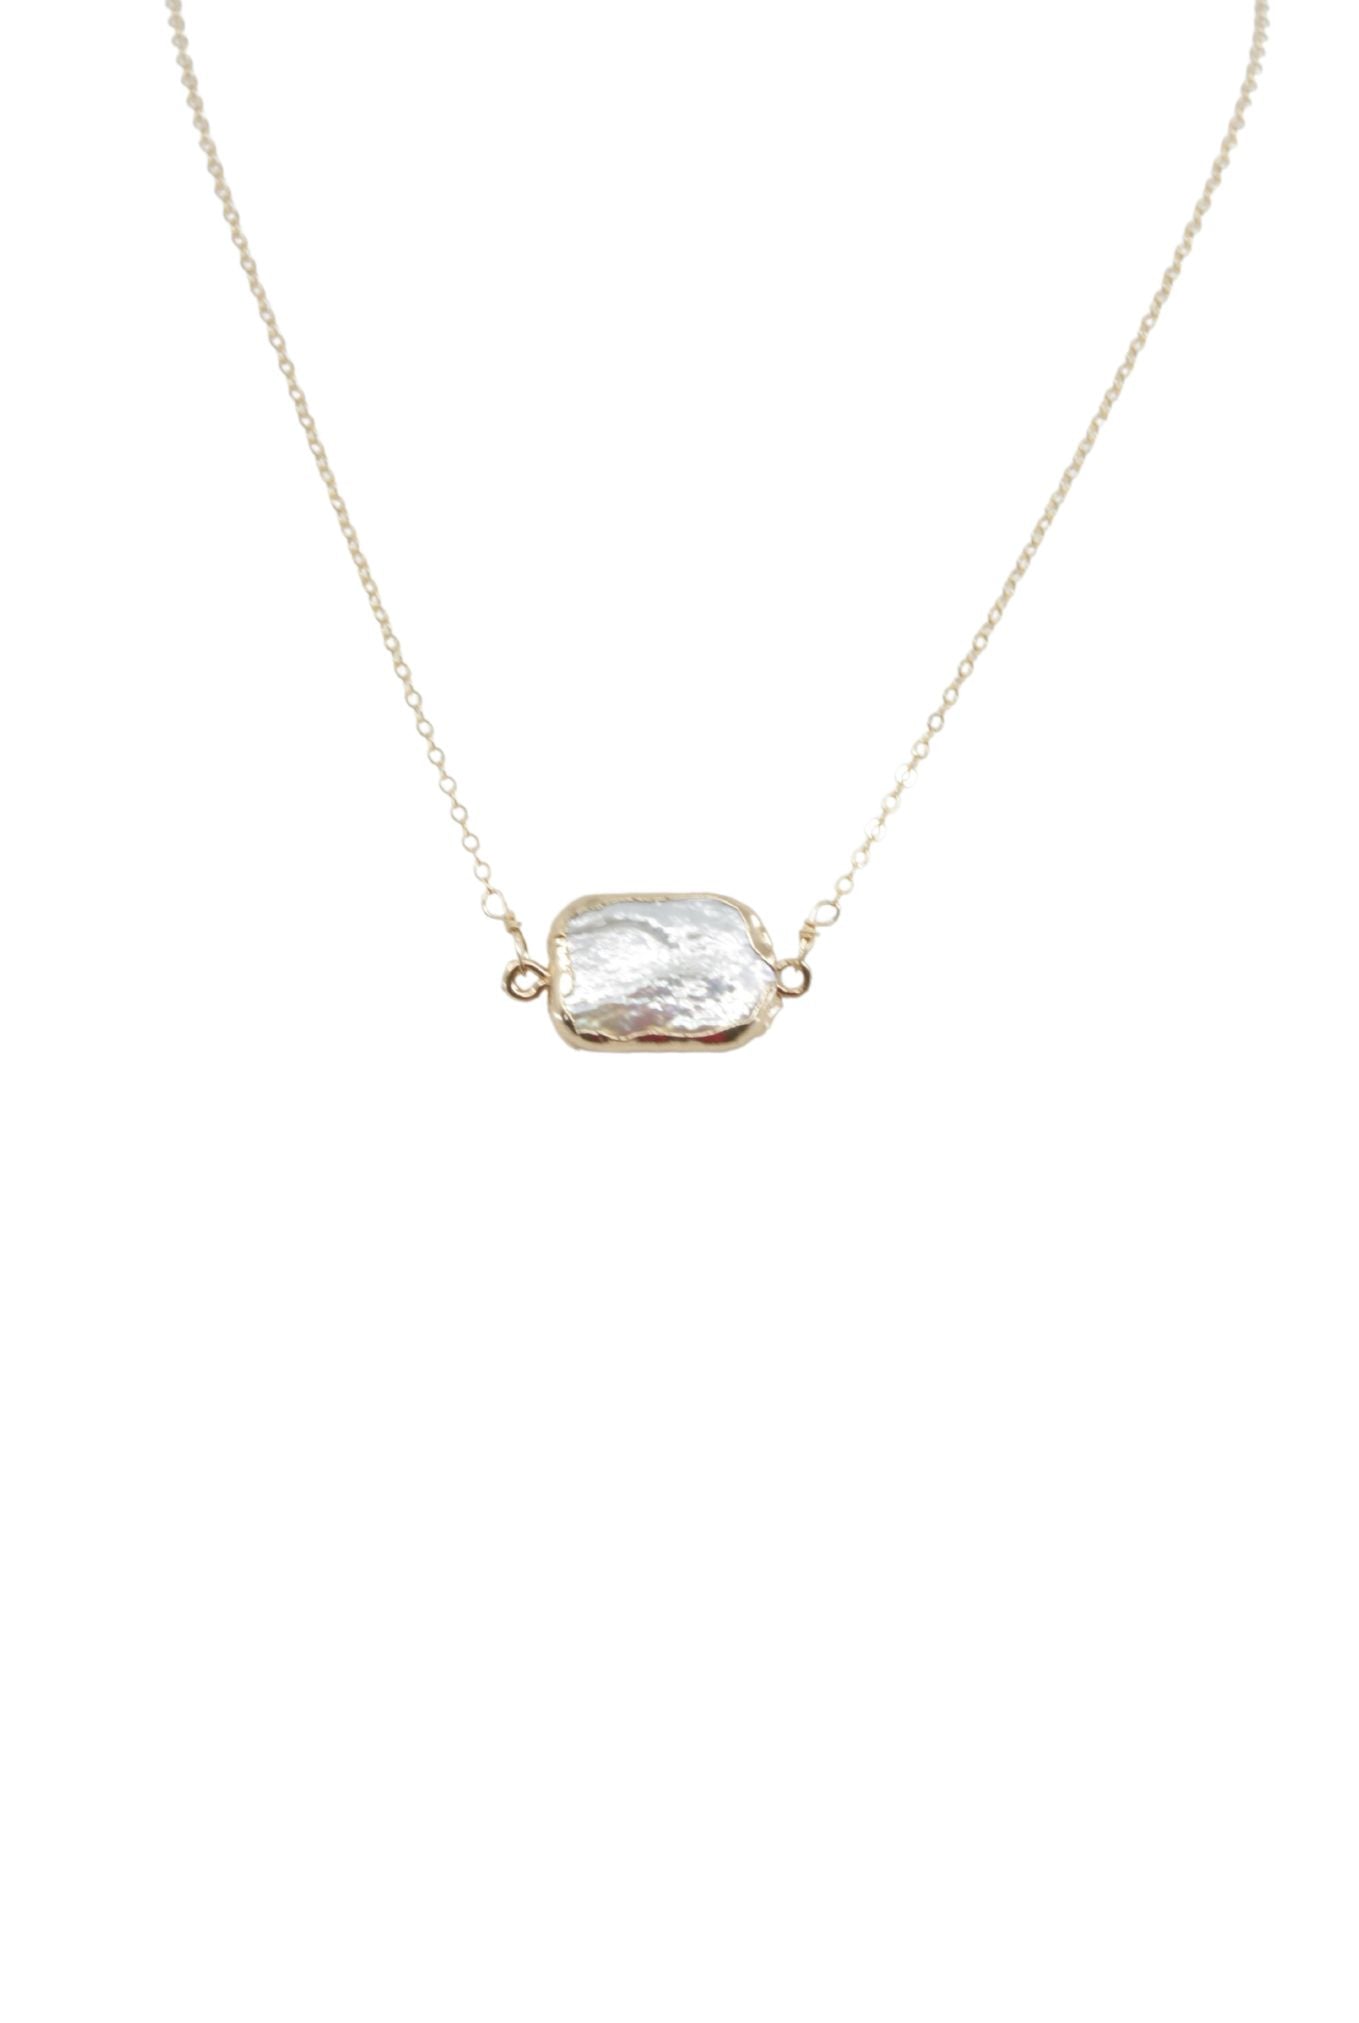 Mrs. Parker Necklace in Freshwater Pearl